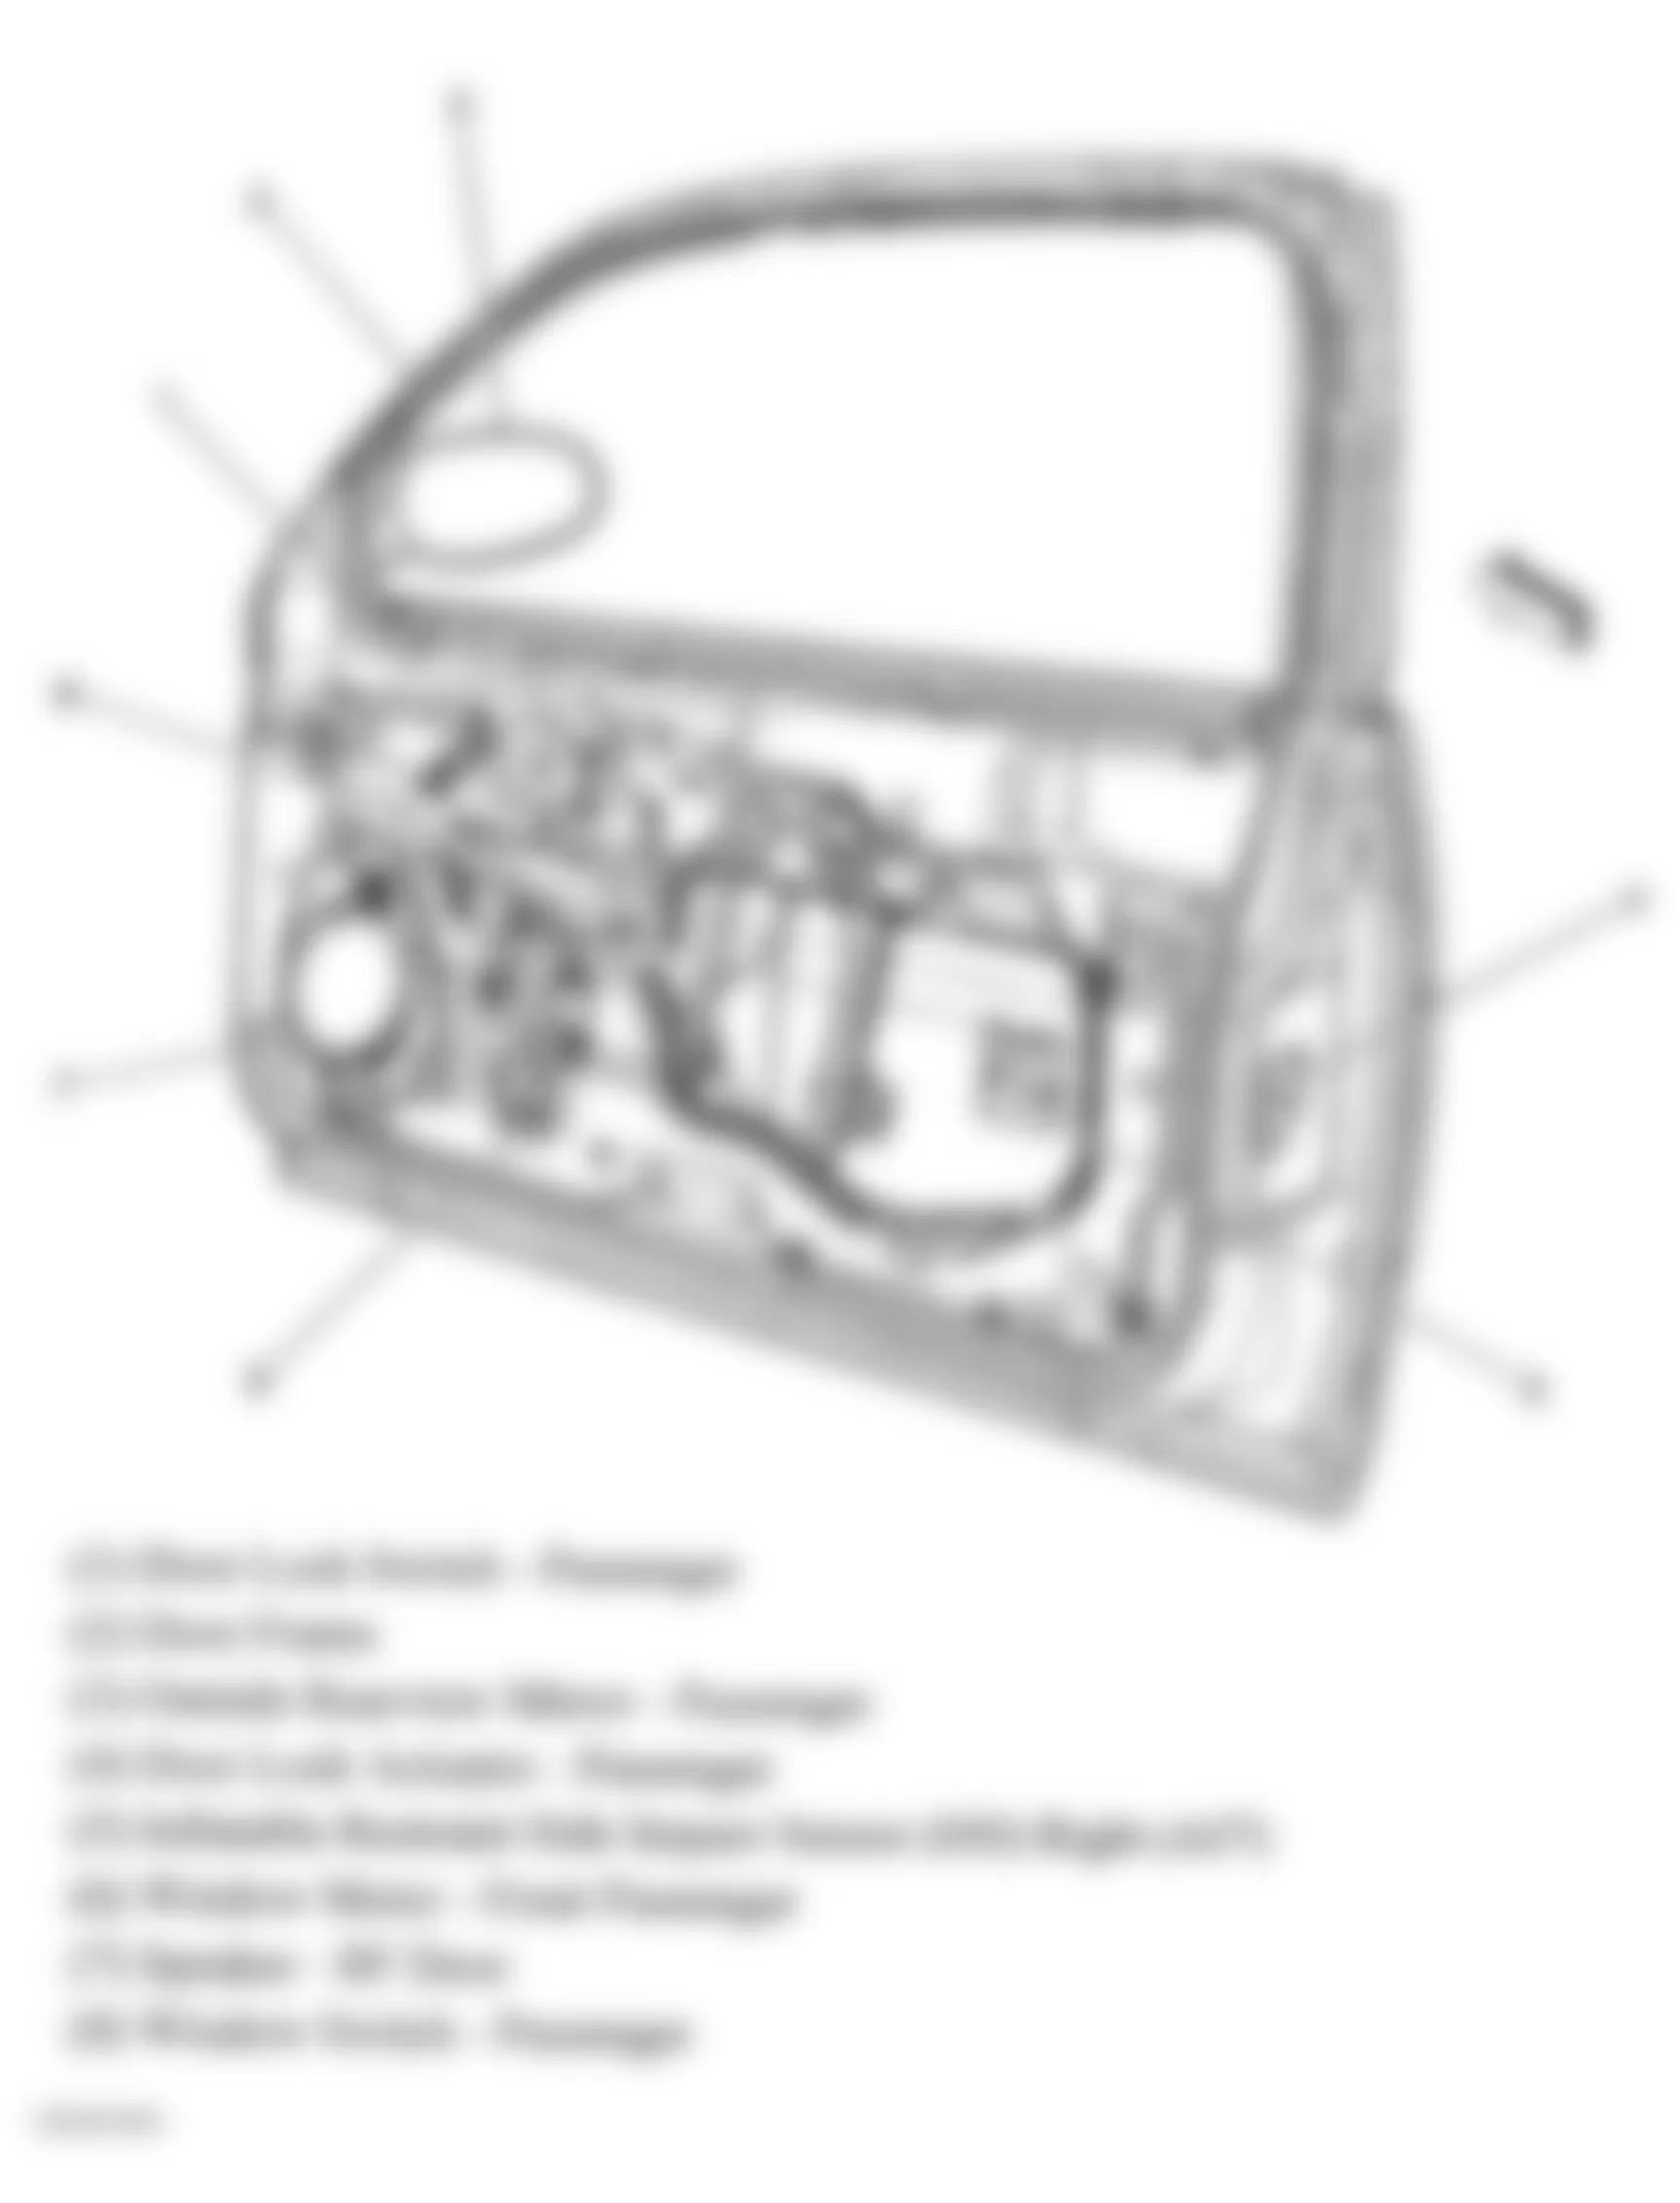 Chevrolet Impala LT 2006 - Component Locations -  Right Front Door Components (Coupe)